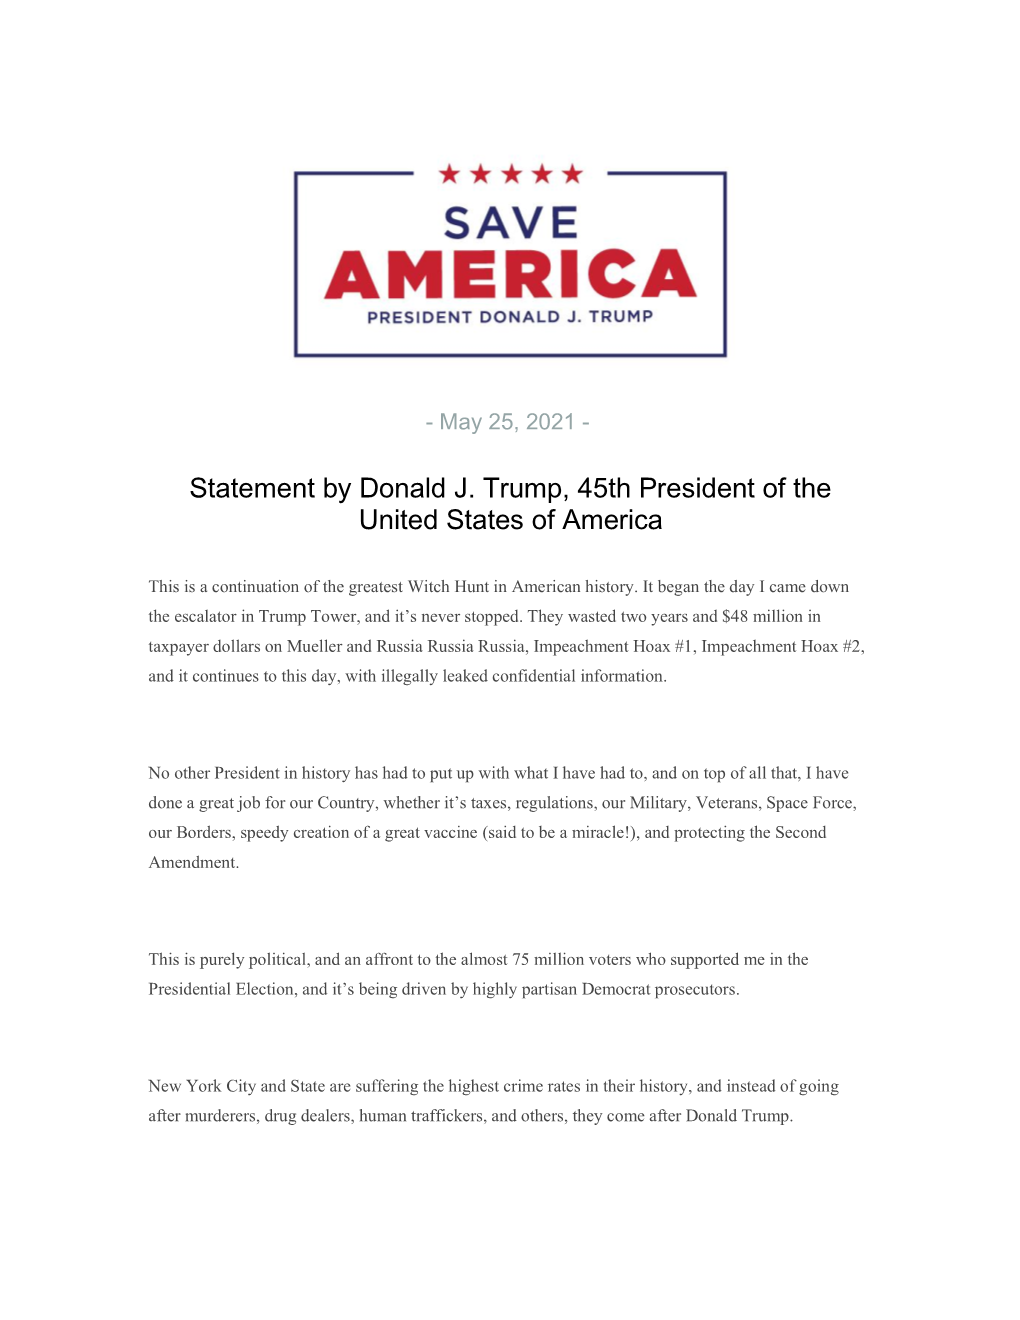 Statement by Donald J. Trump, 45Th President of the United States of America